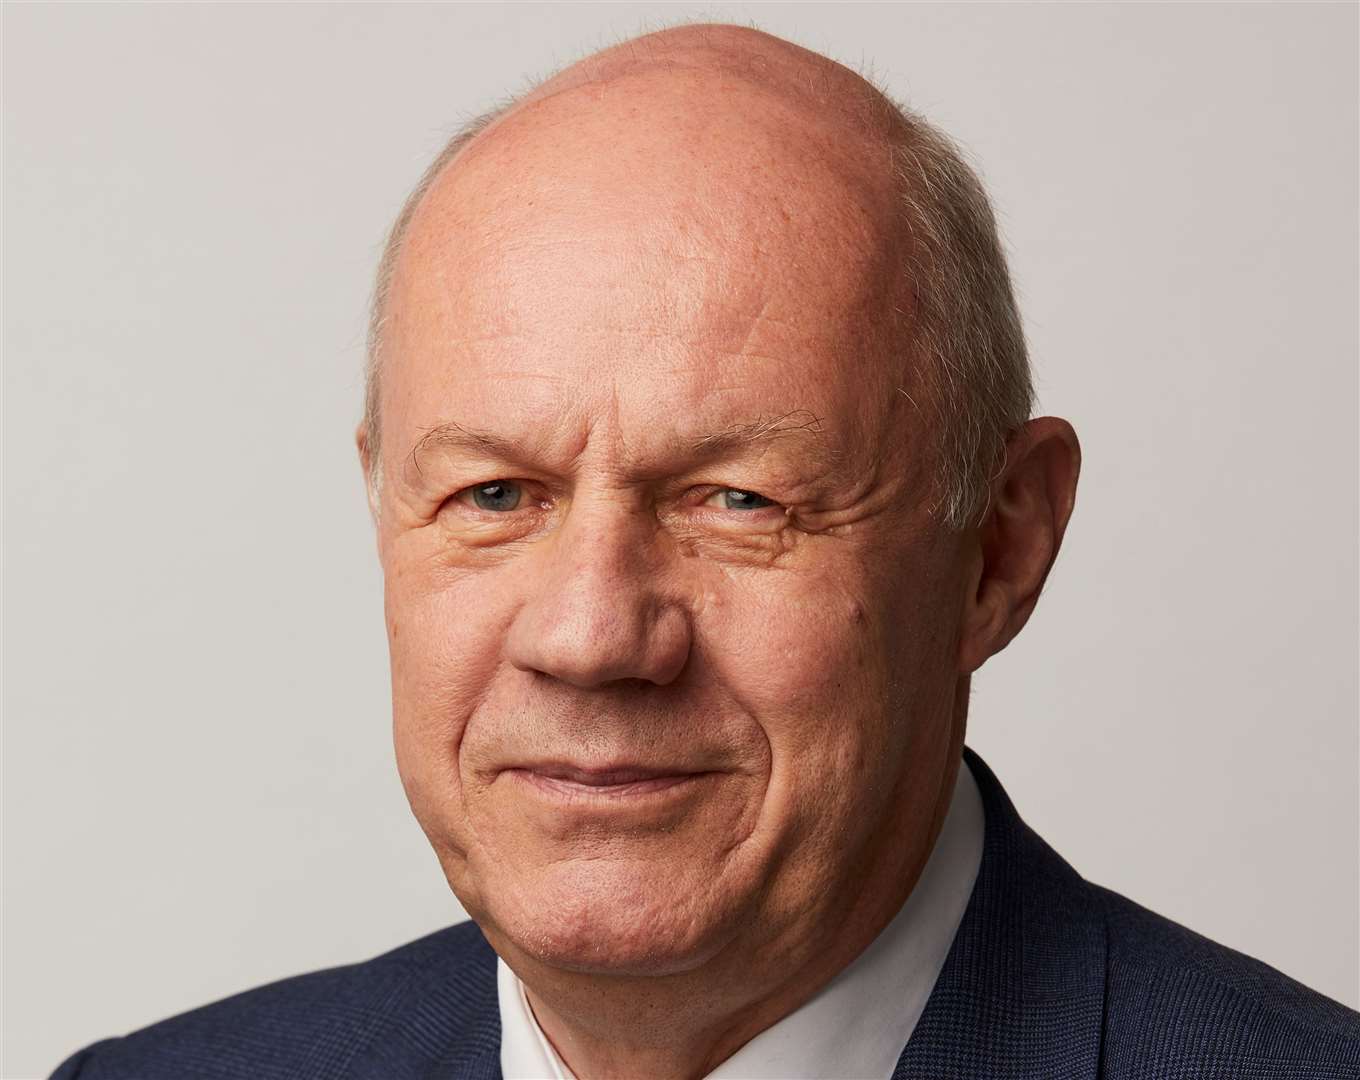 Ashford MP Damian Green thinks holding events in the town centre will draw people in